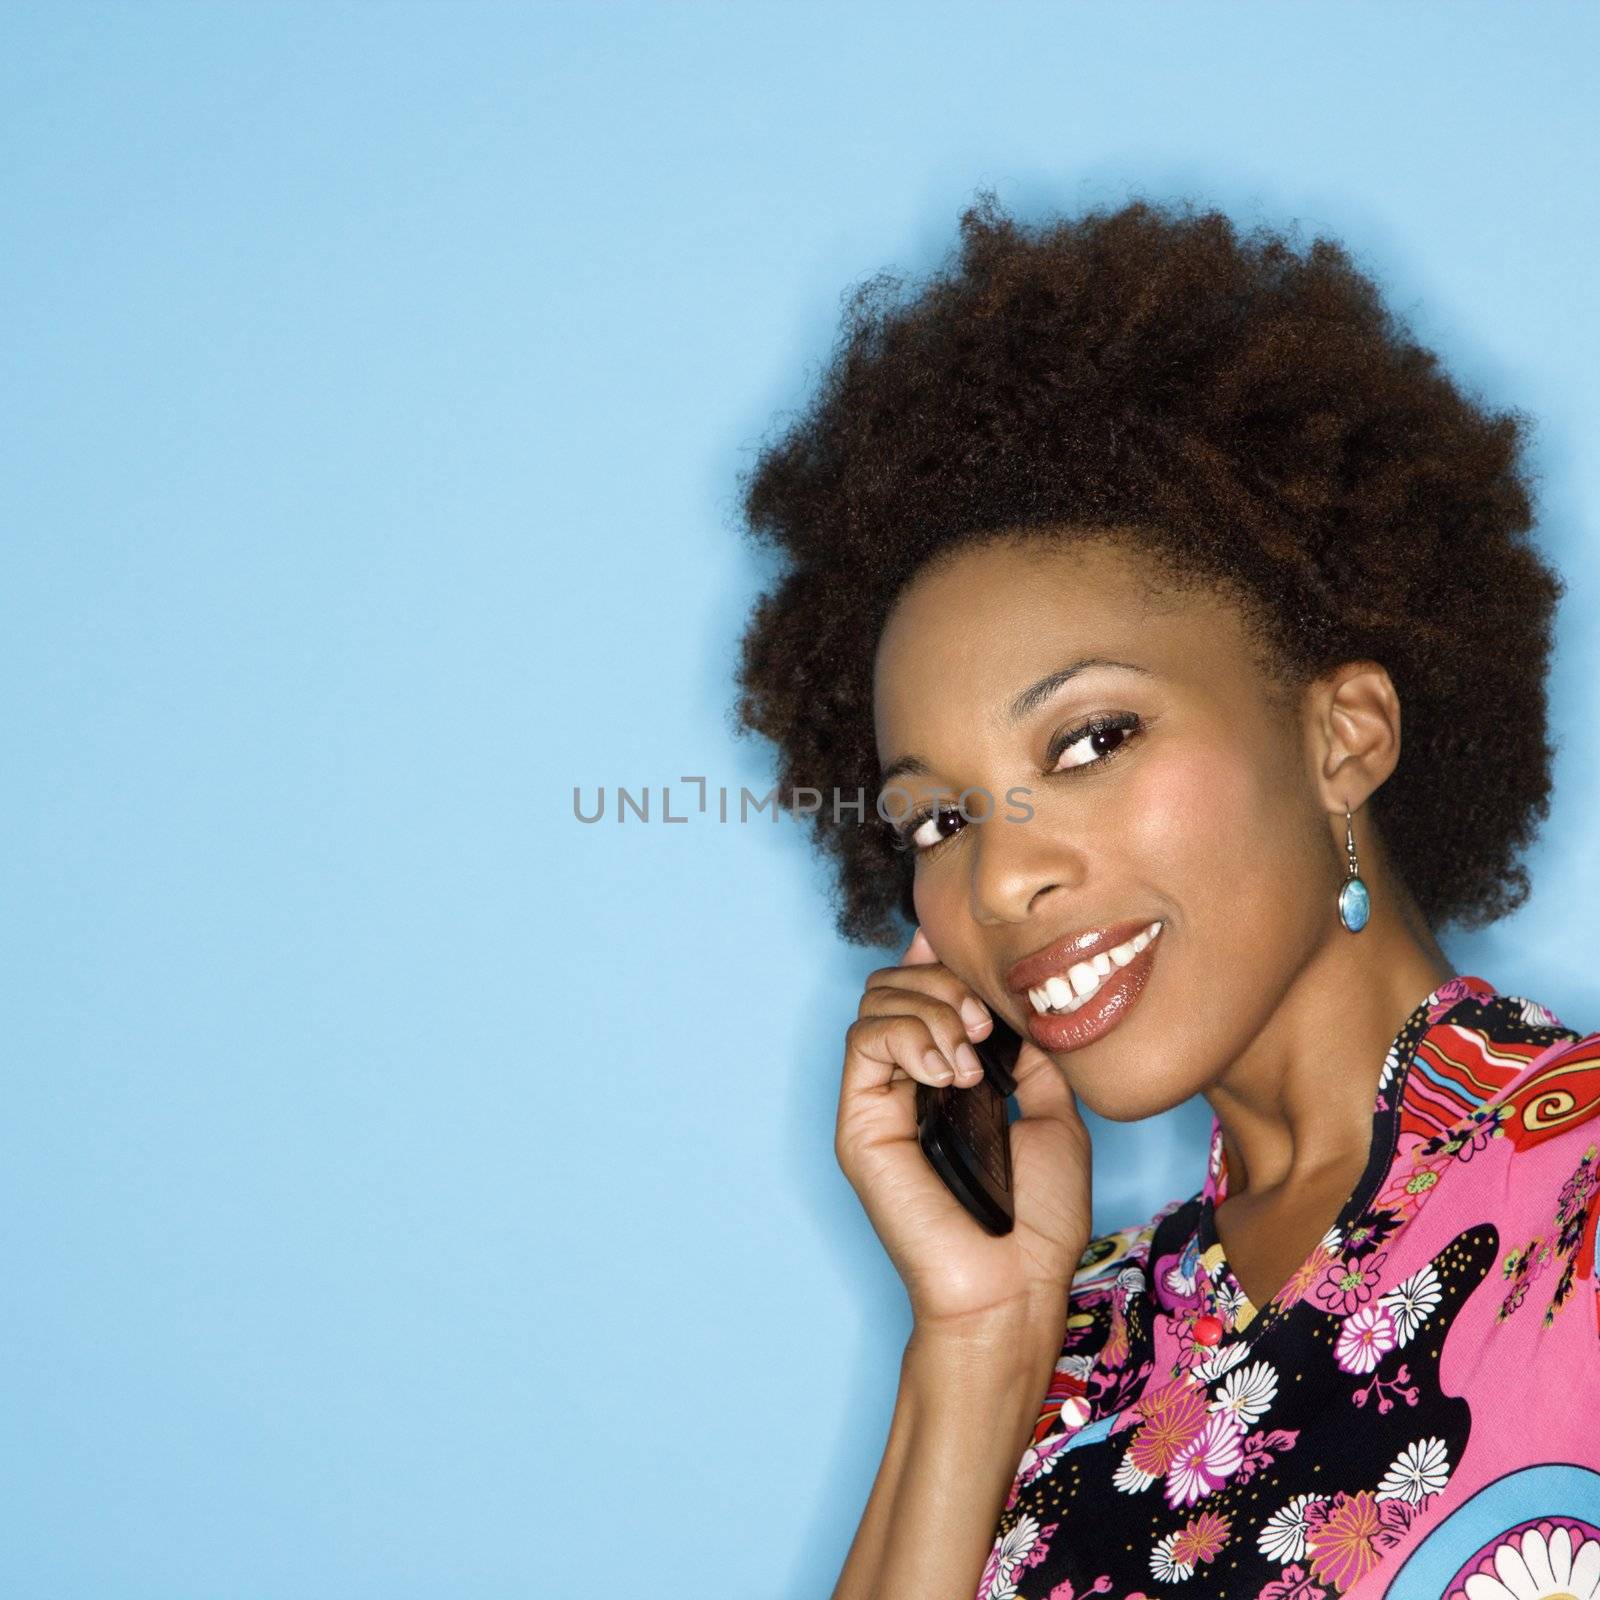 Woman with afro wearing vintage print fabric smiling holding cellphone.